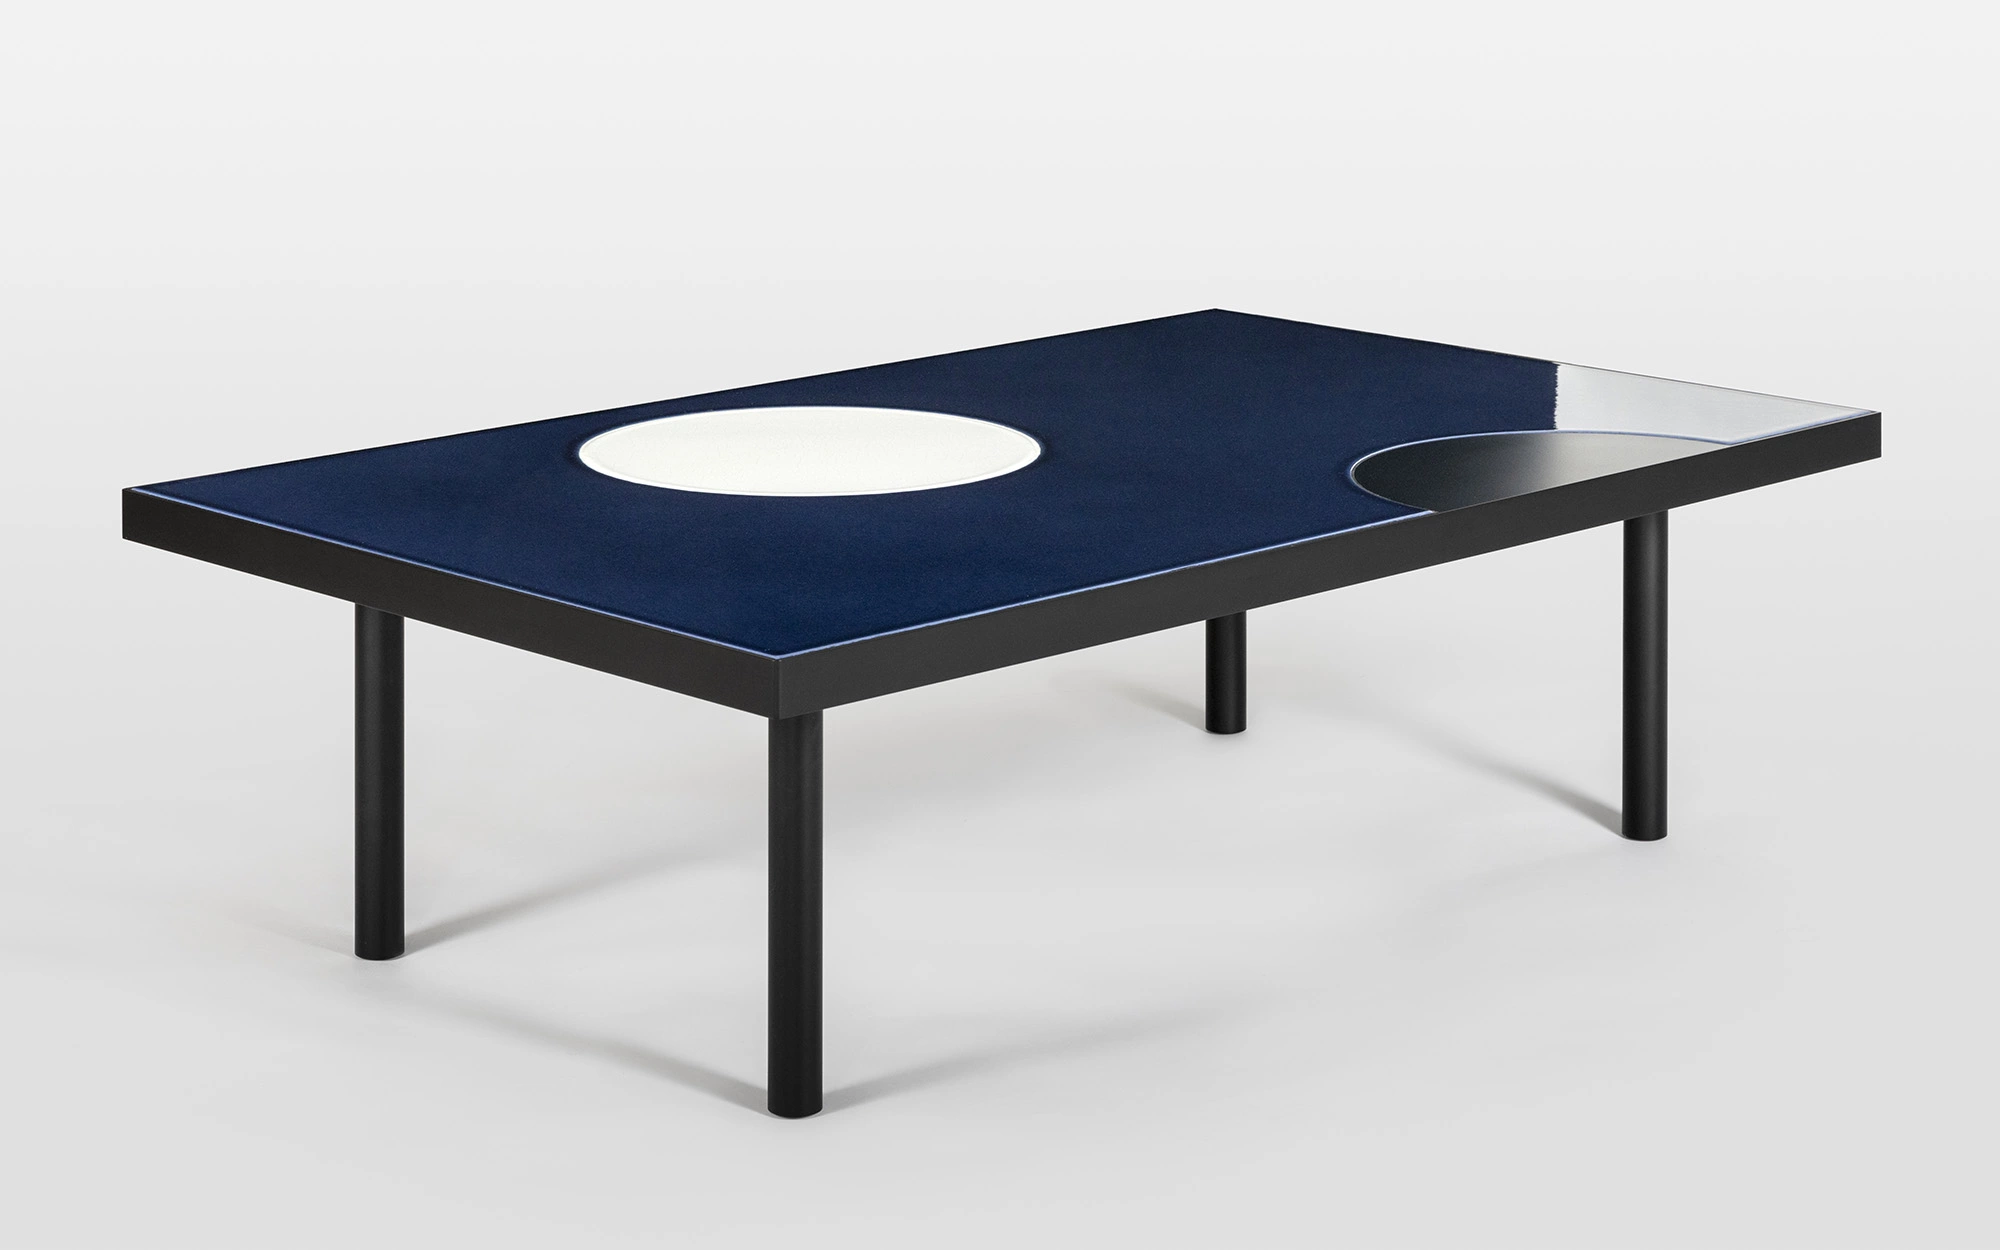 Translation Discolo Coffee Table - Pierre Charpin - Coffee table - Galerie kreo